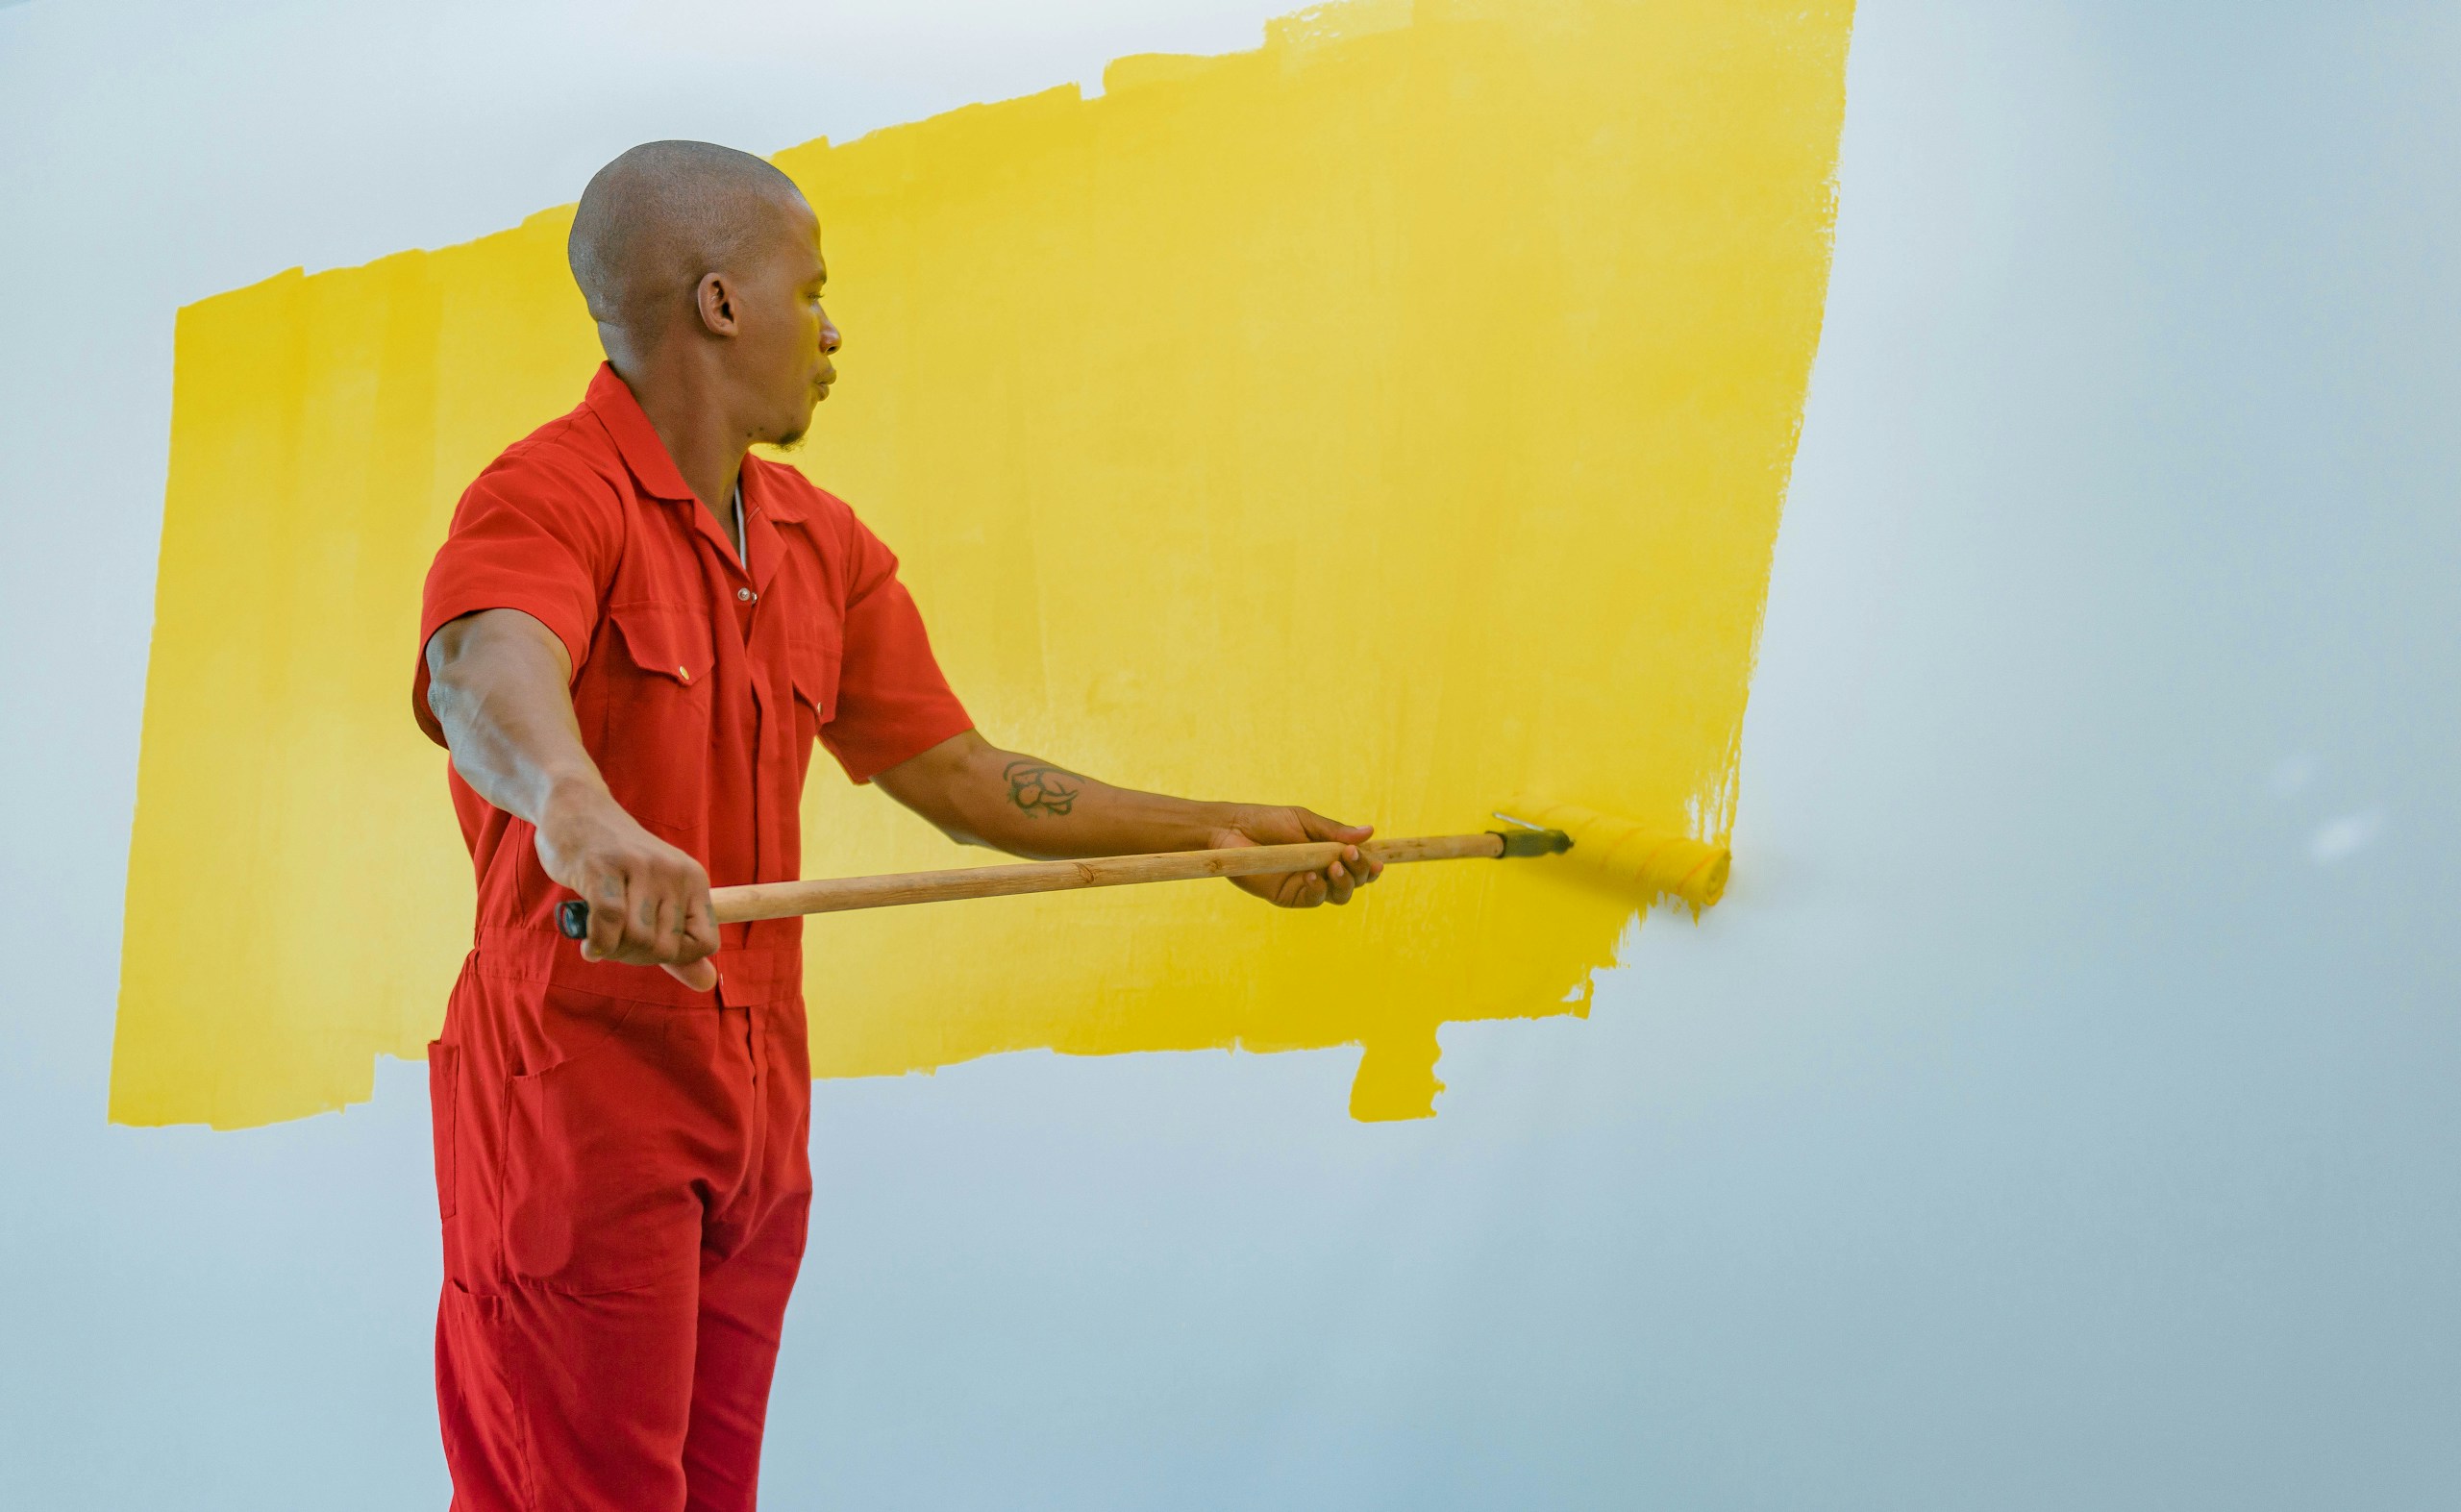 a man painting a wall with yellow paint